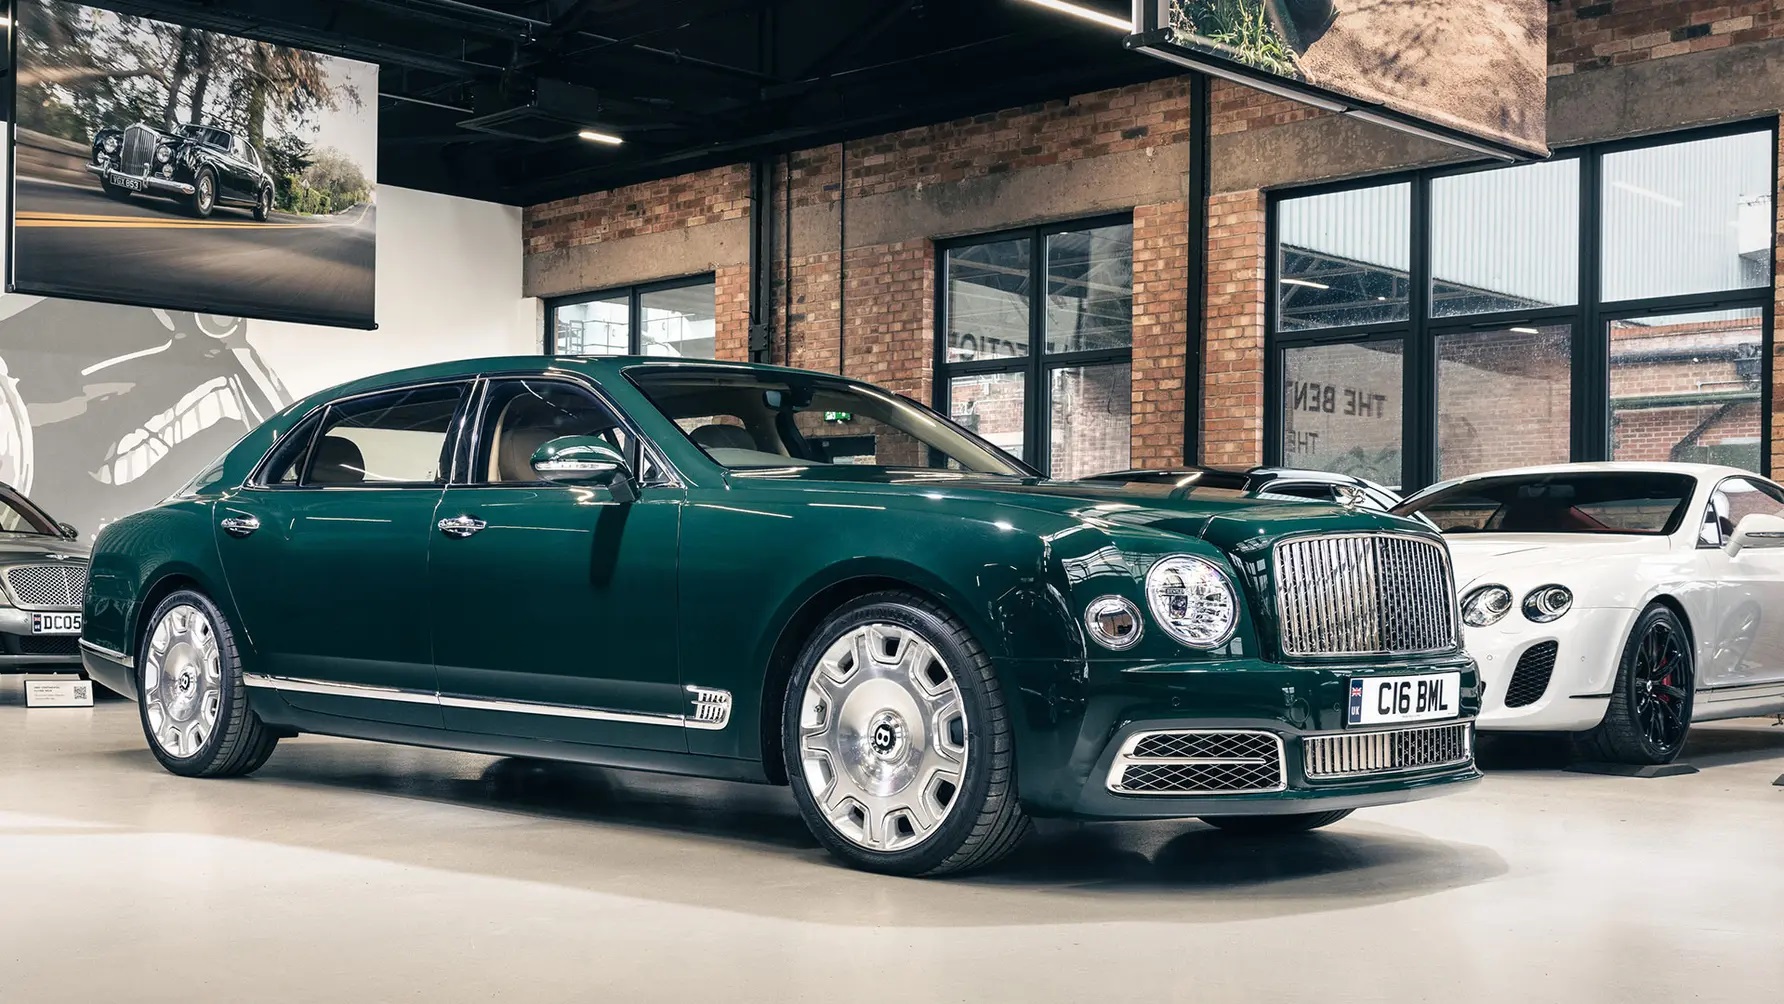 The Queen’s ride, the Bentley’s Mulsanne takes its place in history